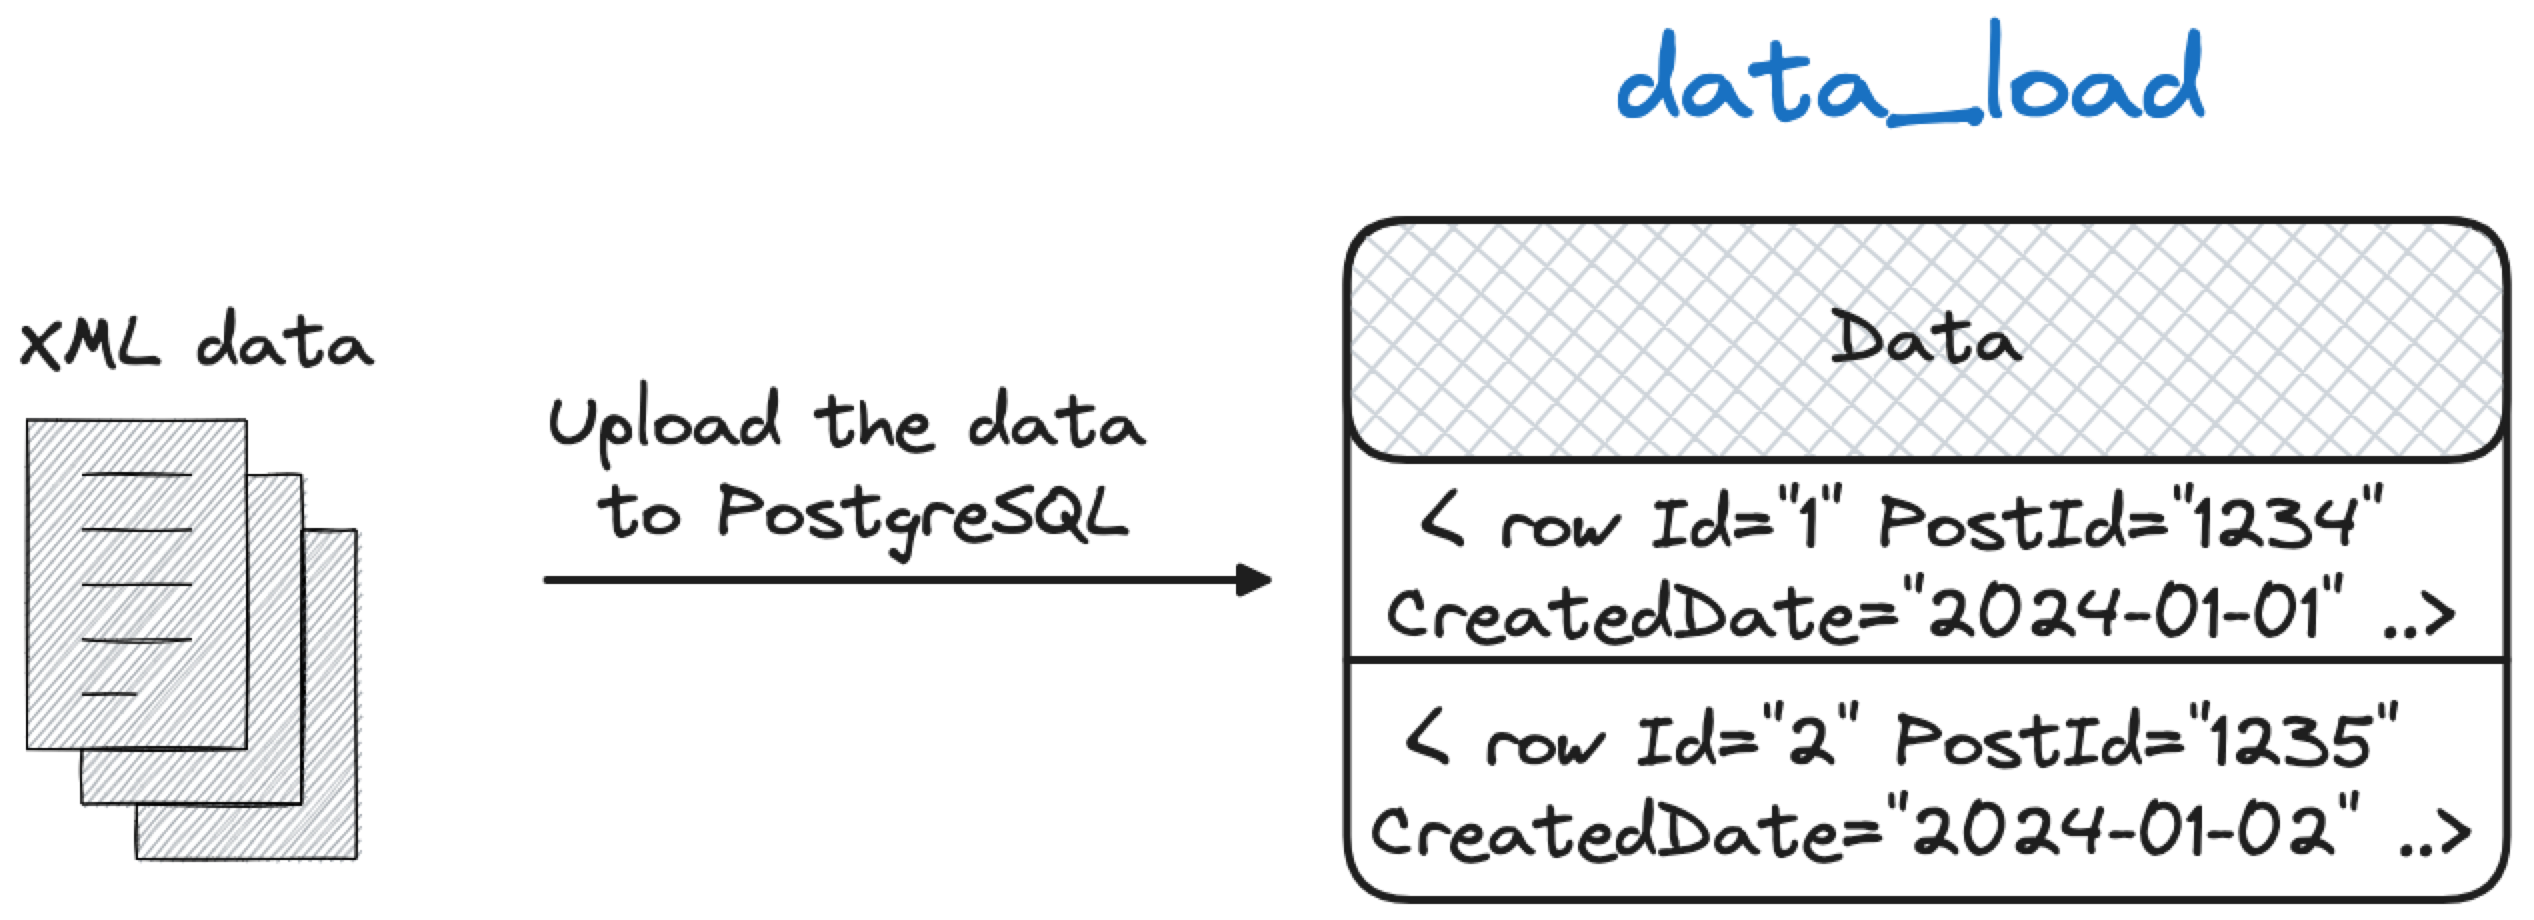 Architecture of the data loading phase - step 1